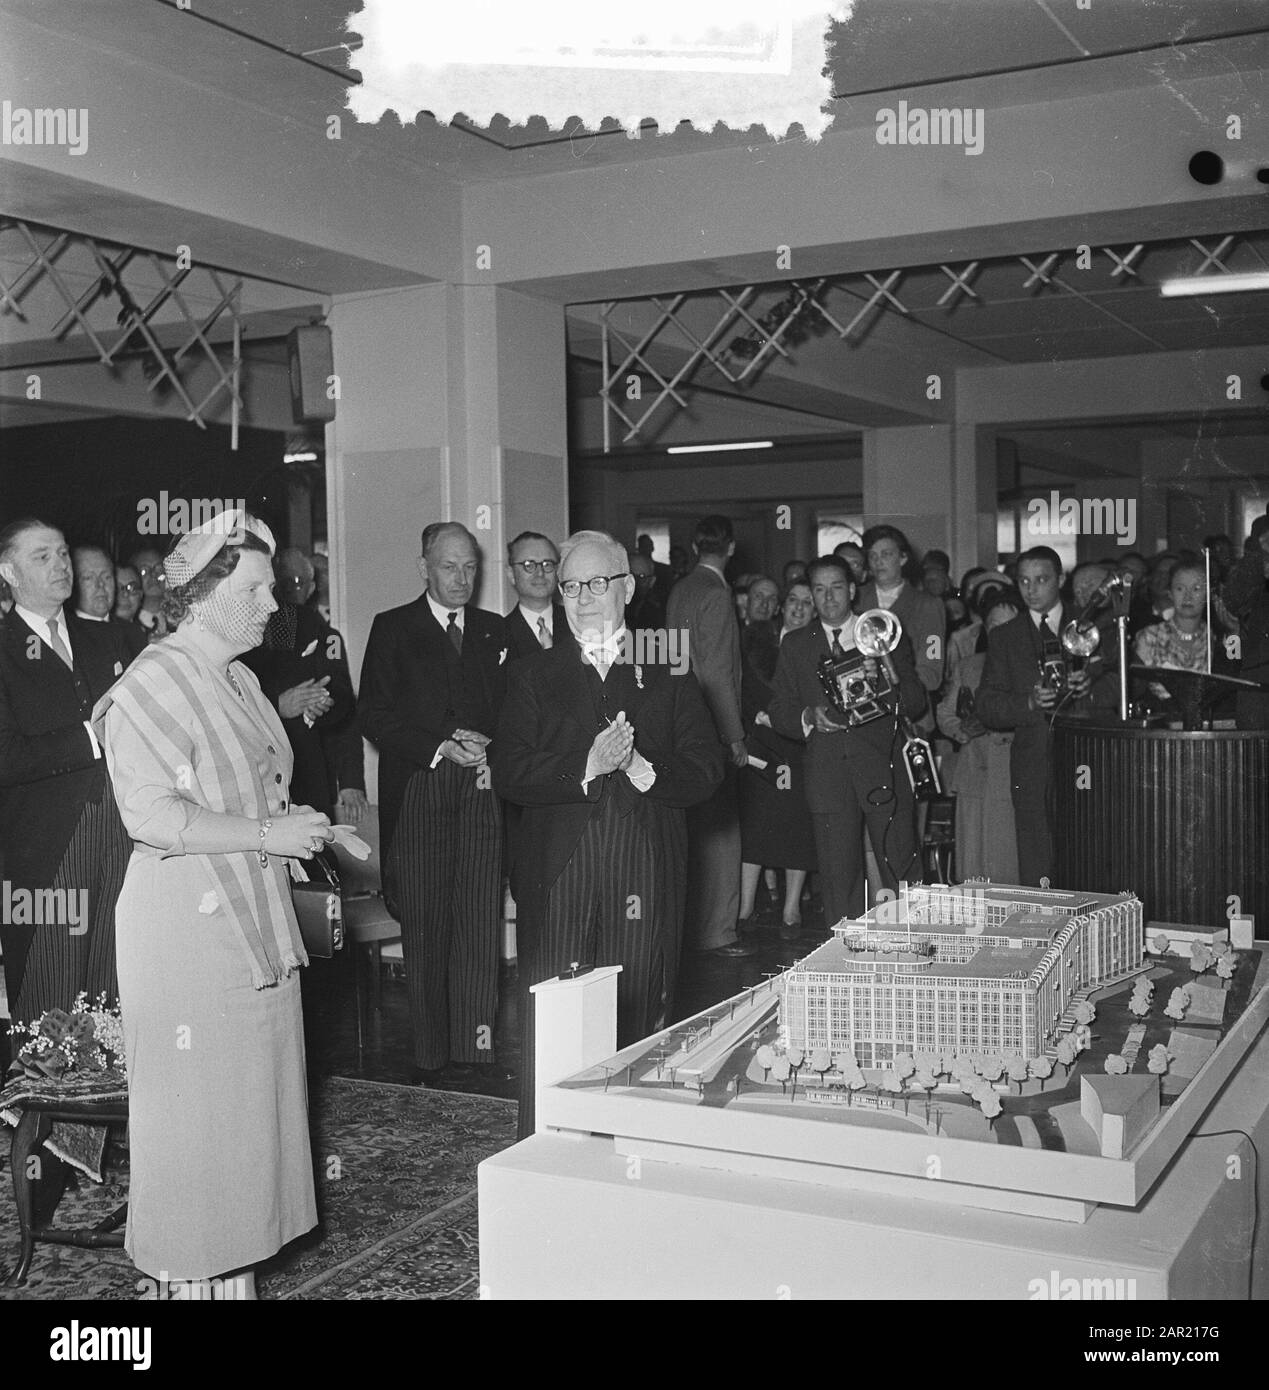 Opening Groothandelsgebouw in Rotterdam by Queen Juliana Annotation: The architects are Huig A. Maaskant and Willem van Tijen Datum: 3 June 1953 Location: Rotterdam, Zuid-Holland Keywords: wholesale buildings, queens, royal house, openings Personal name: Juliana, Queen Stock Photo